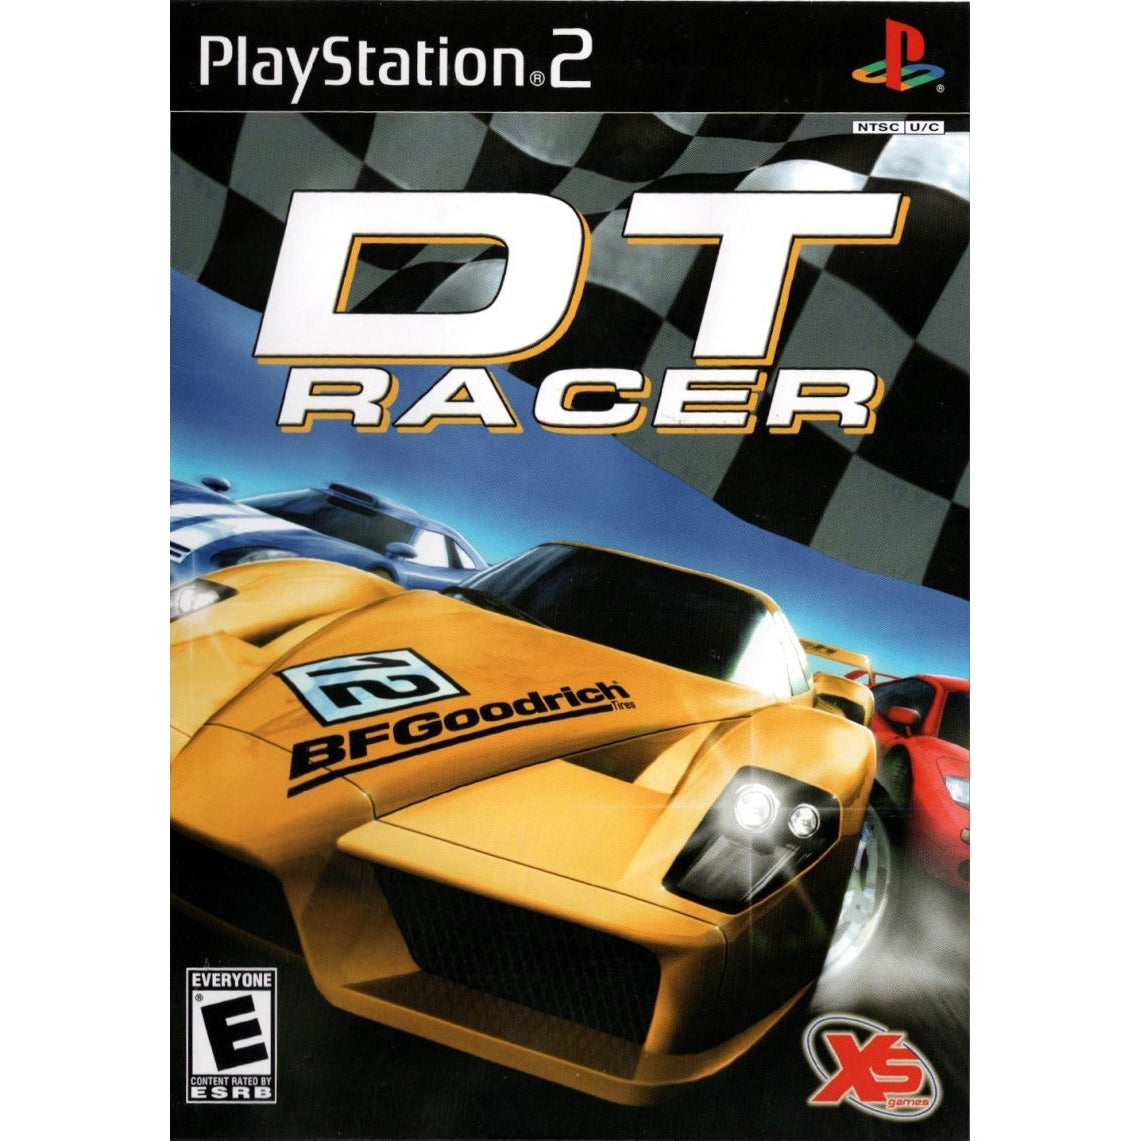 DT Racer - PlayStation 2 (PS2) Game Complete - YourGamingShop.com - Buy, Sell, Trade Video Games Online. 120 Day Warranty. Satisfaction Guaranteed.